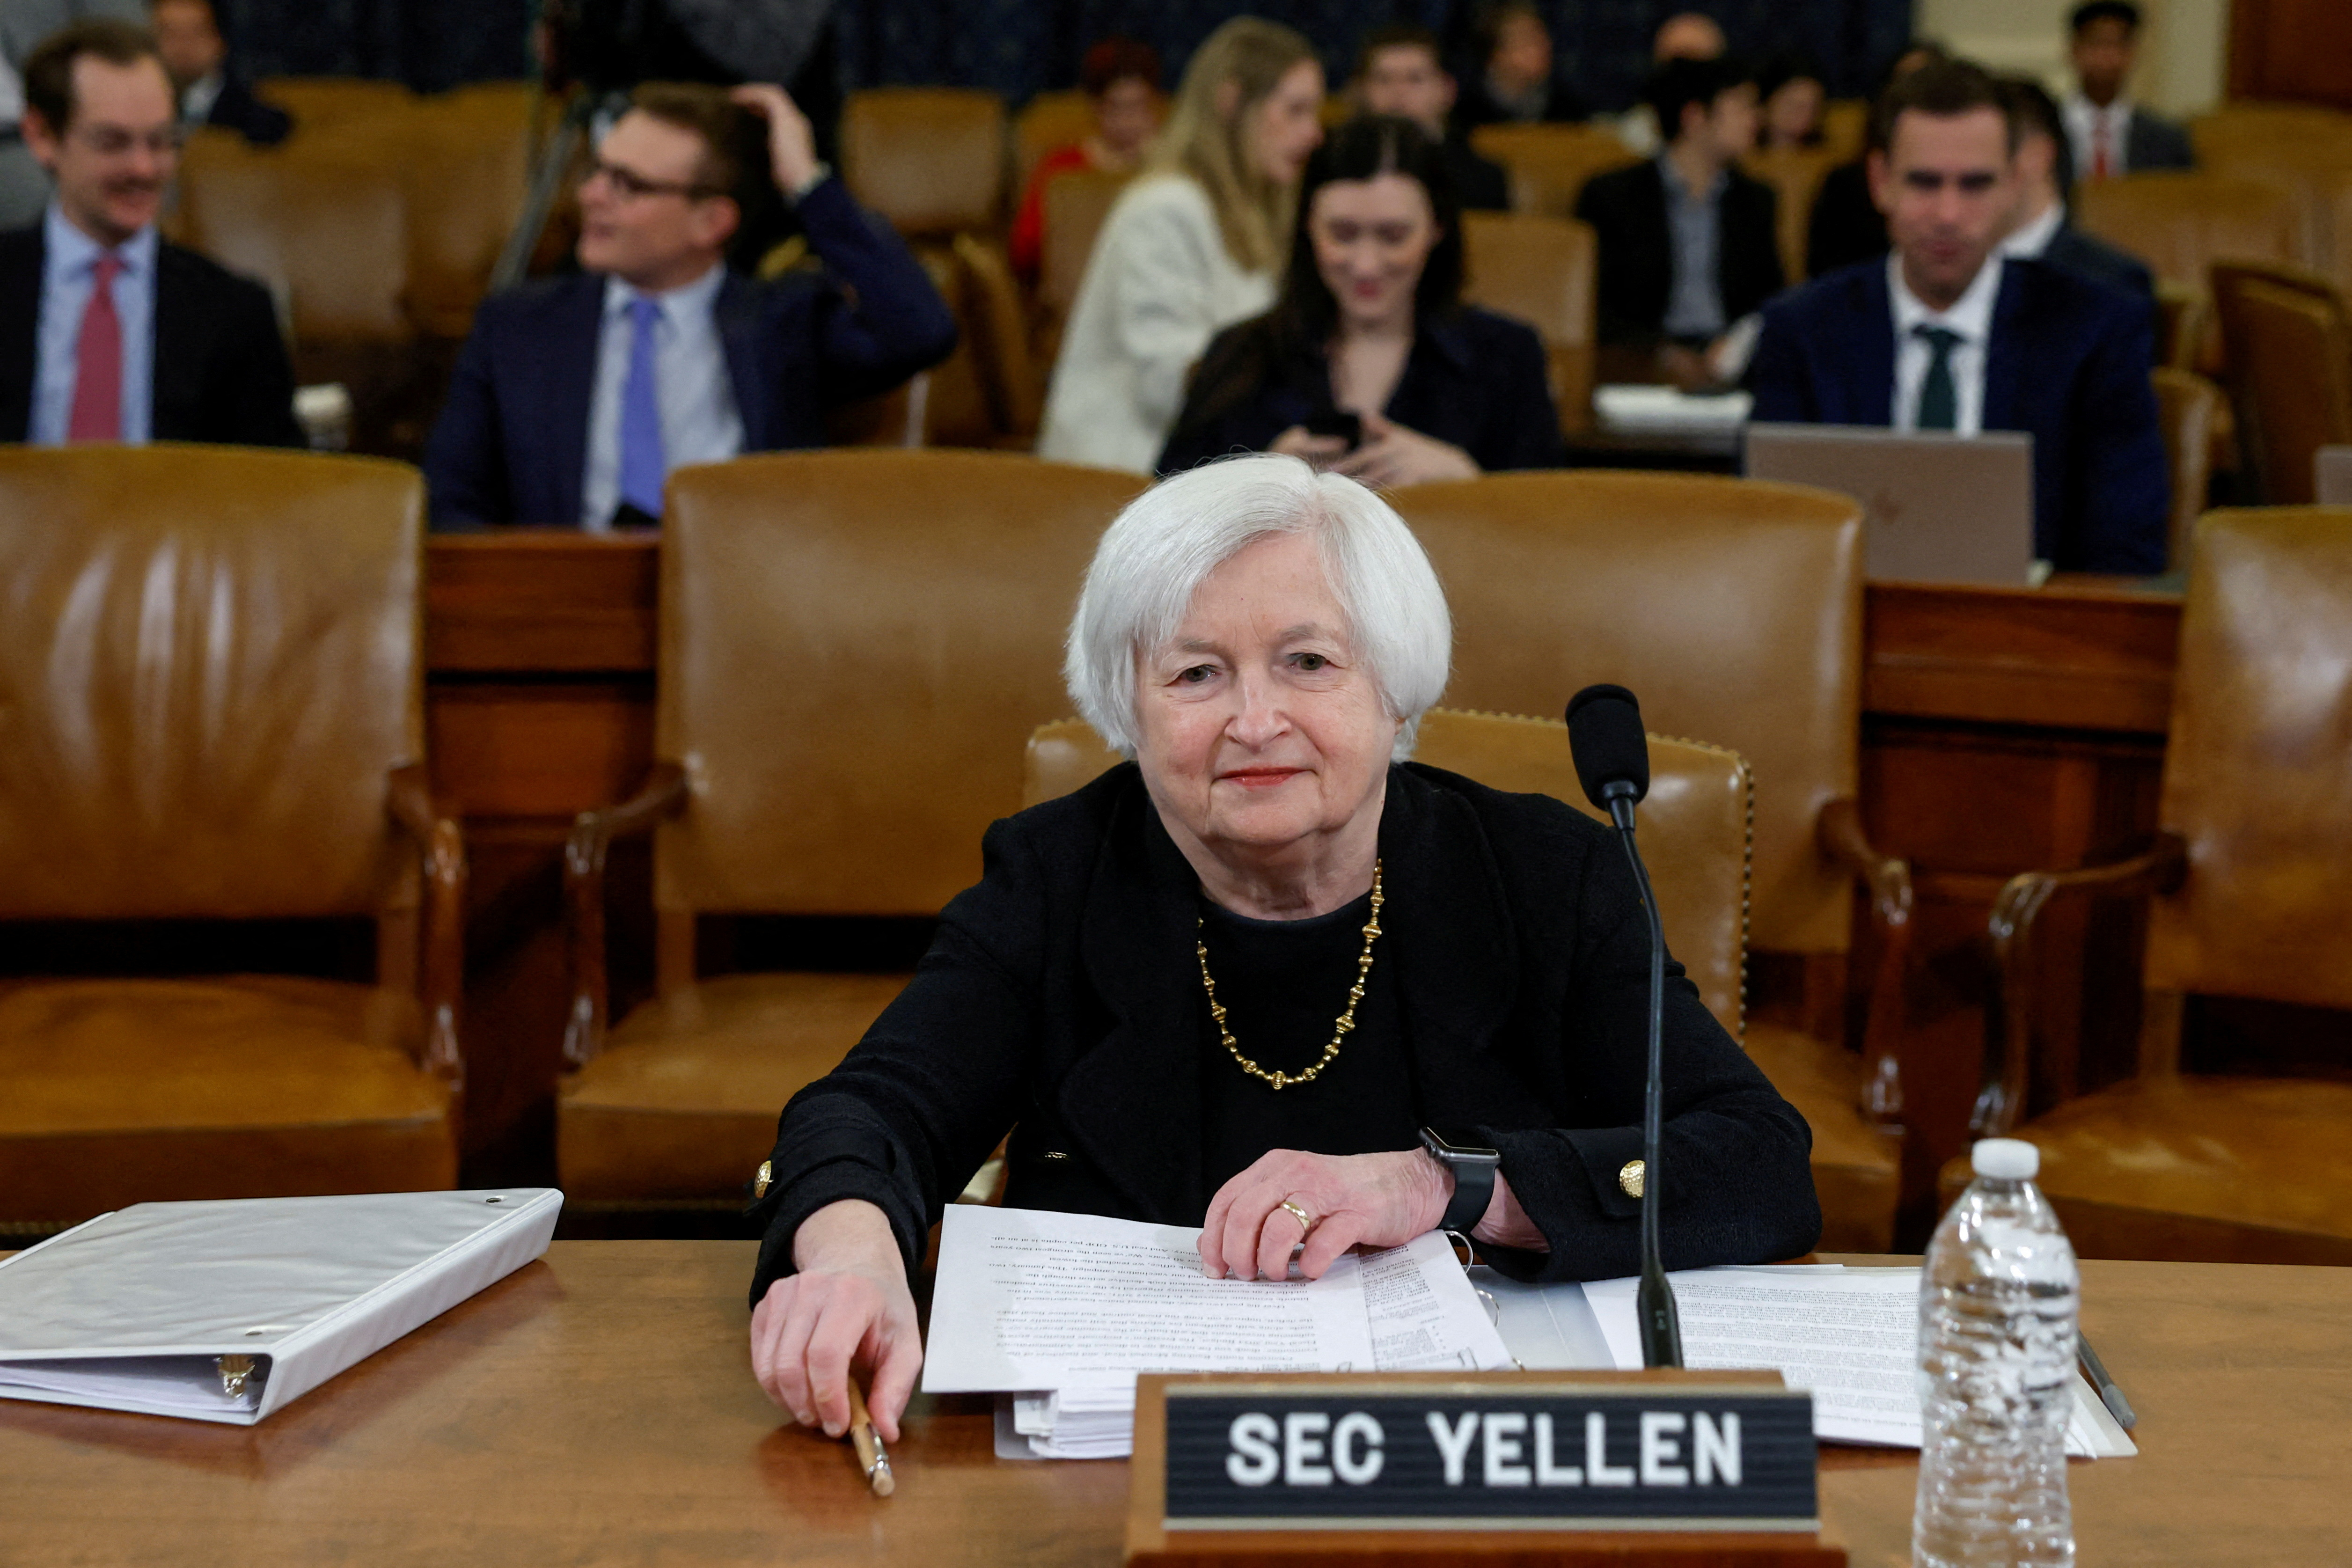 The American banking system is healthy, but not all deposits are guaranteed, Yellen tells the senators